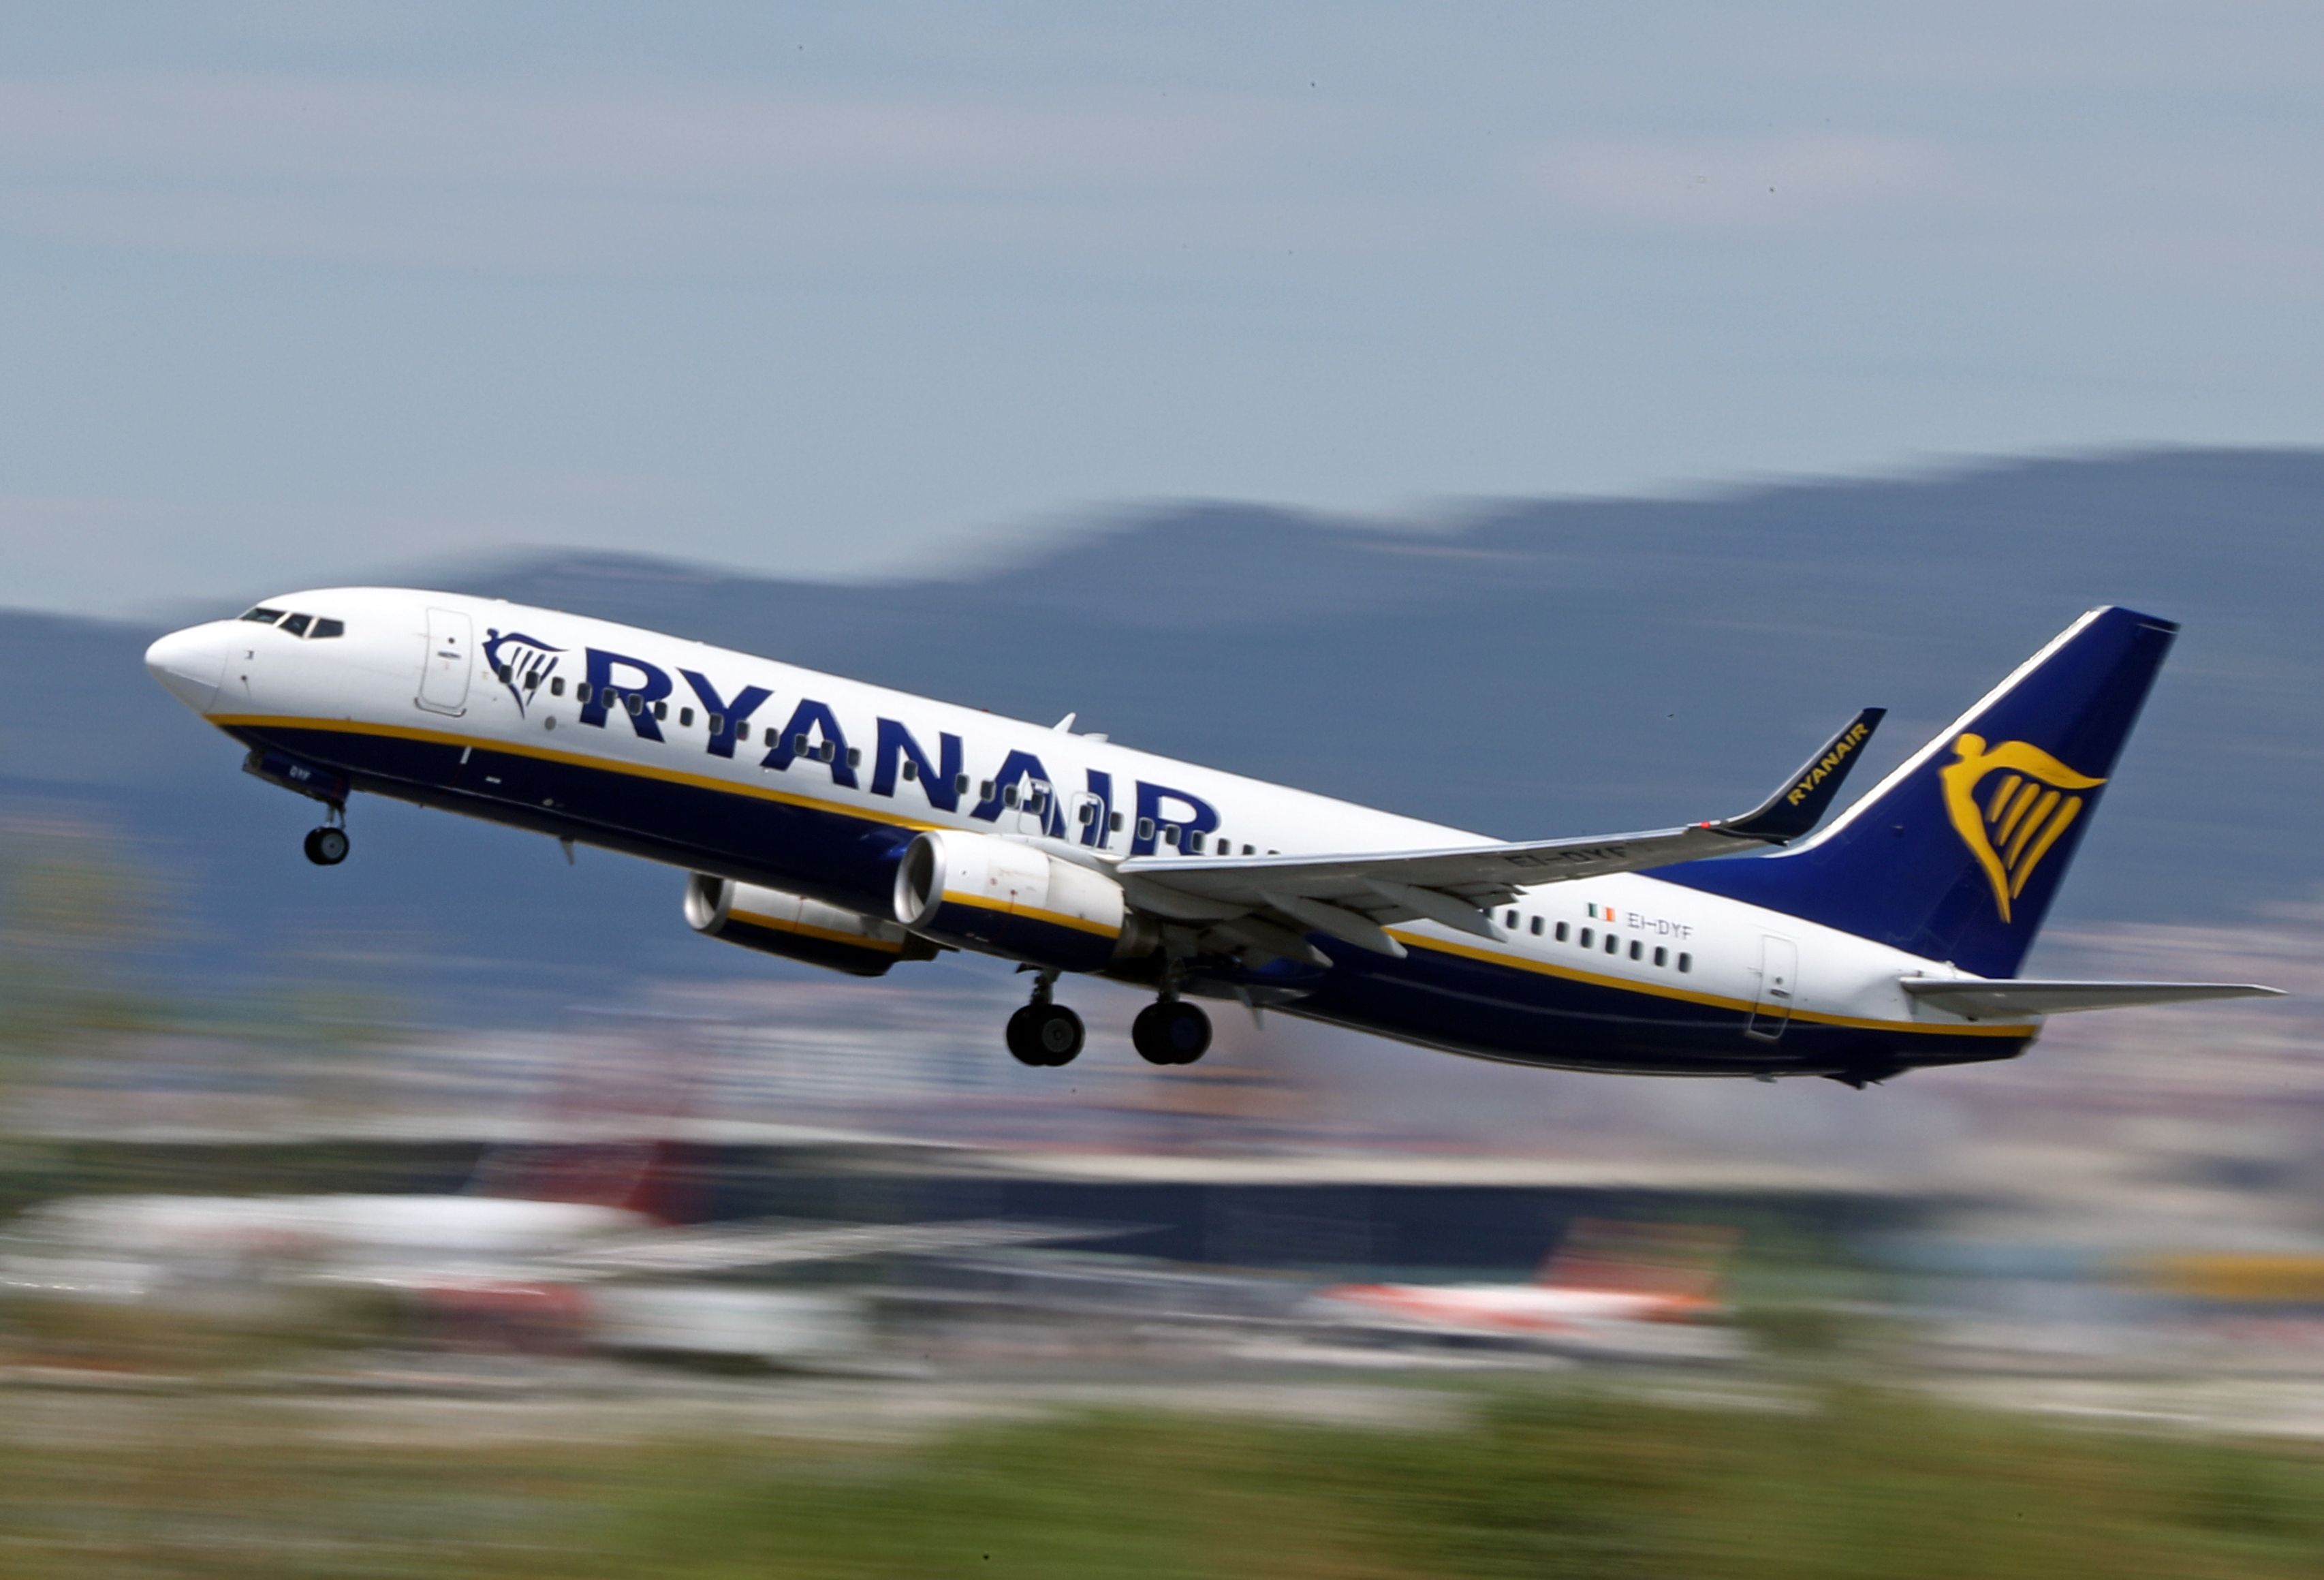 A Ryanair Boeing 737 is pictured taking off in front of a blurry background.